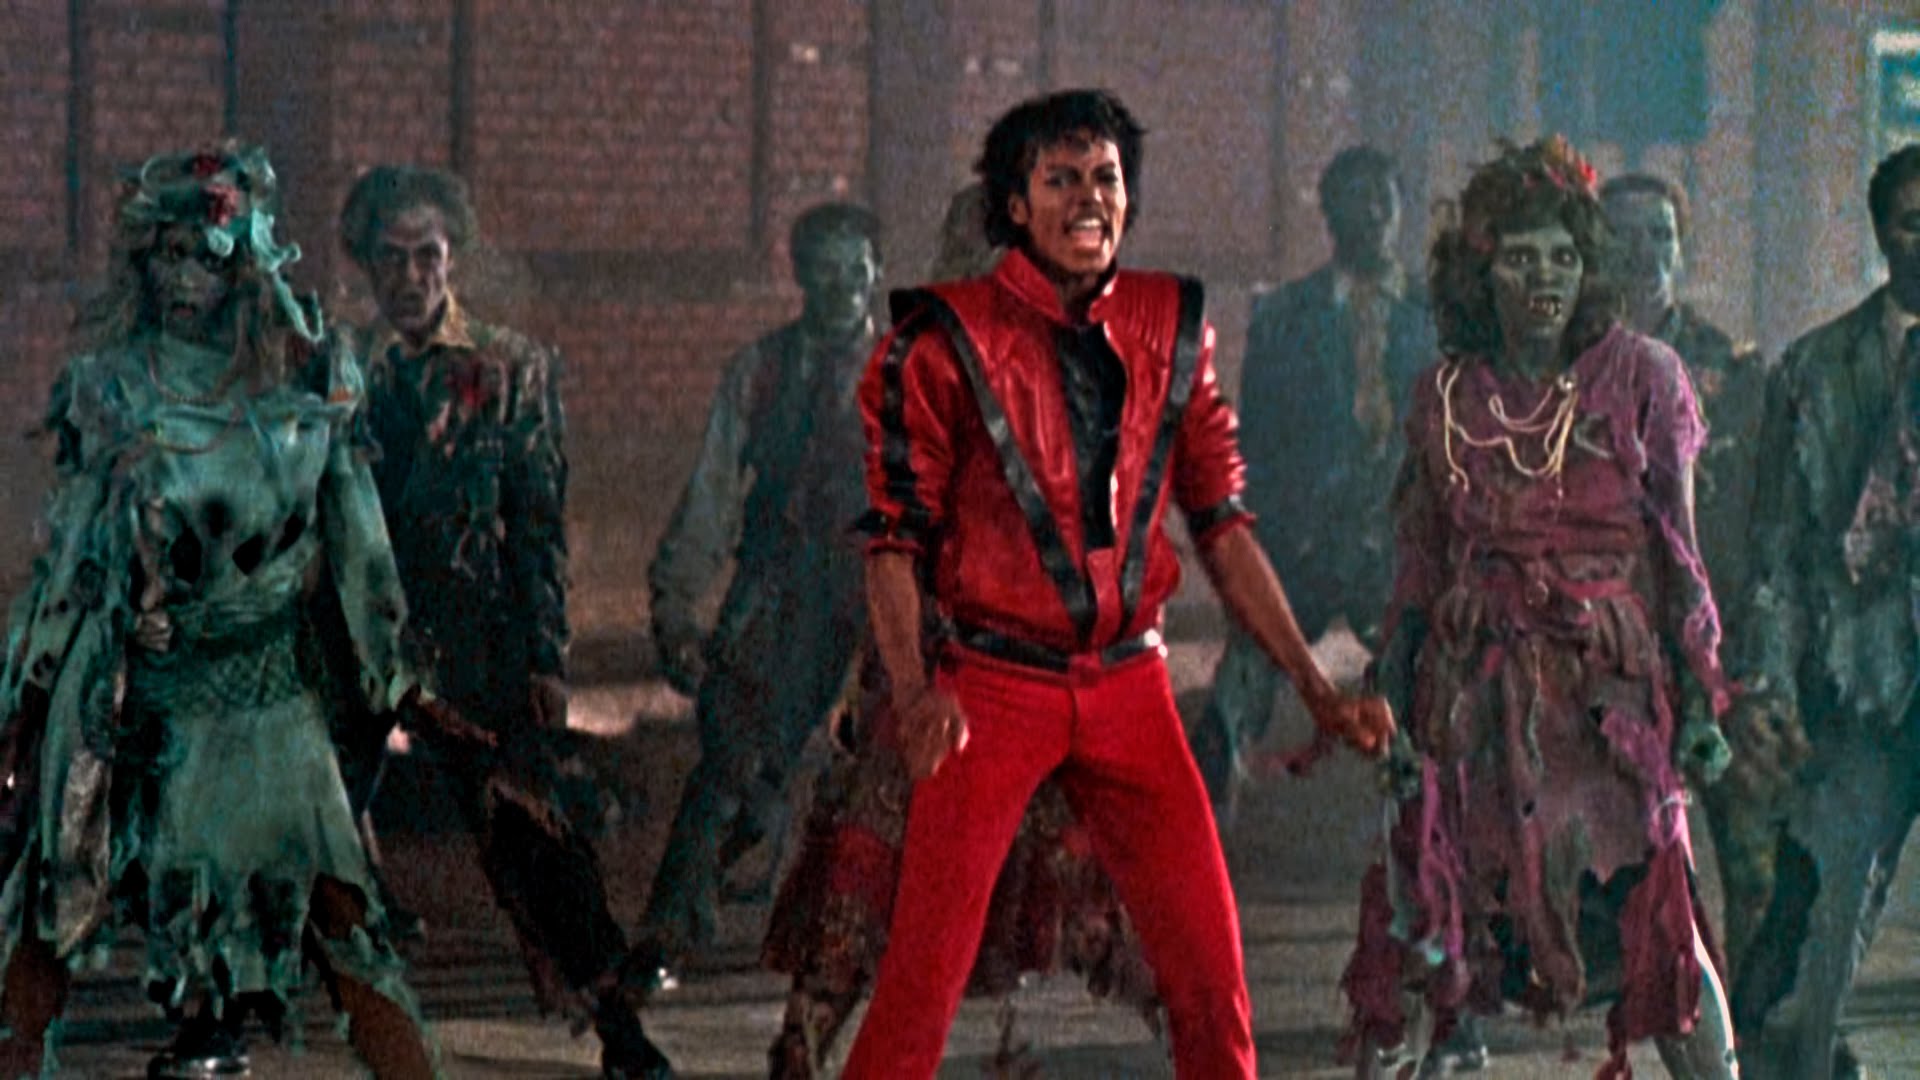 Thriller video of Michael Jackson get new dimension